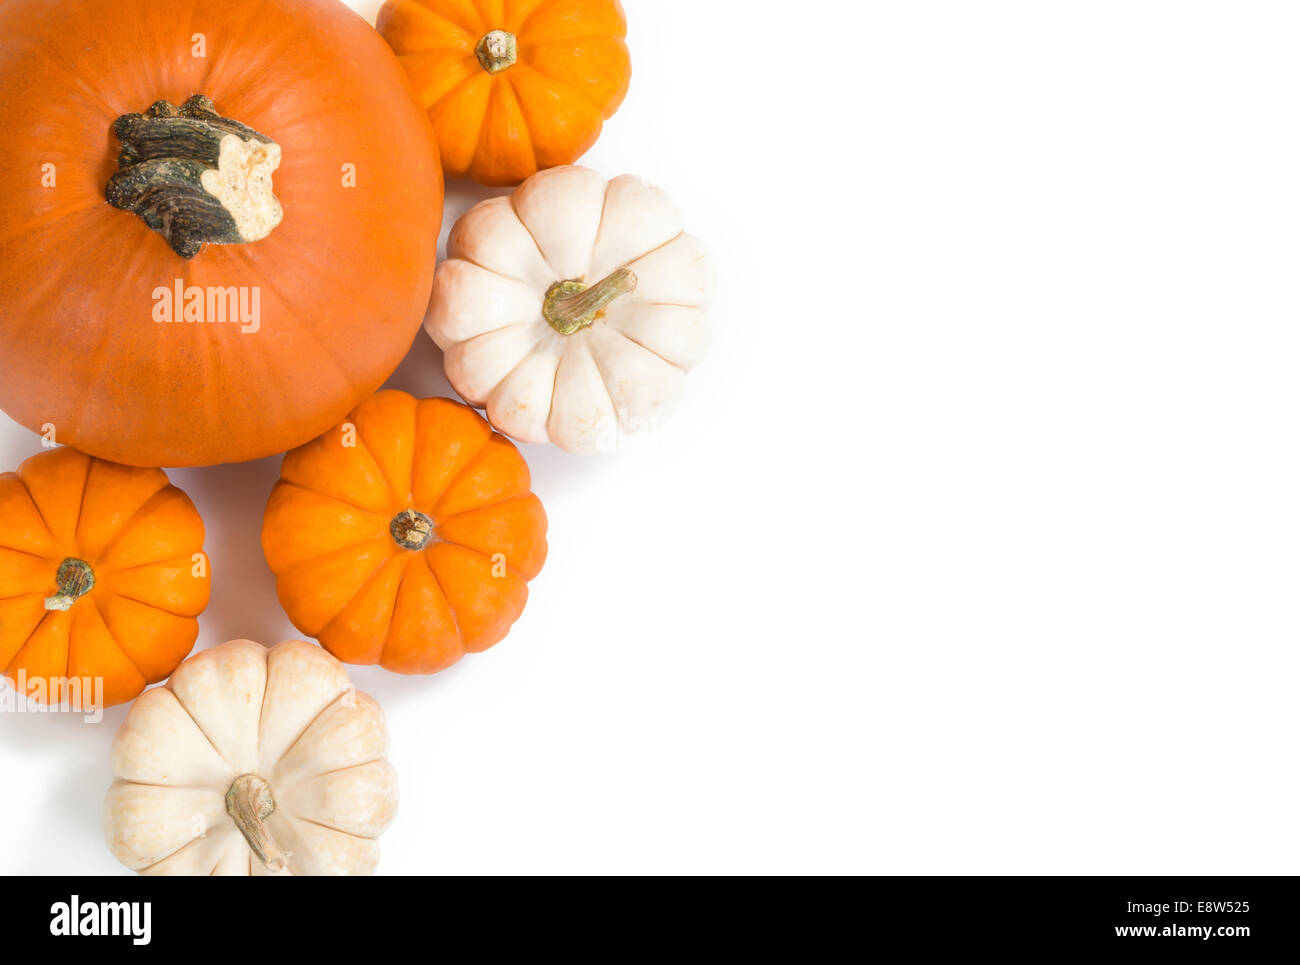 Pie pumpkin surrounded by mini pumpkins against white background, top view Stock Photo